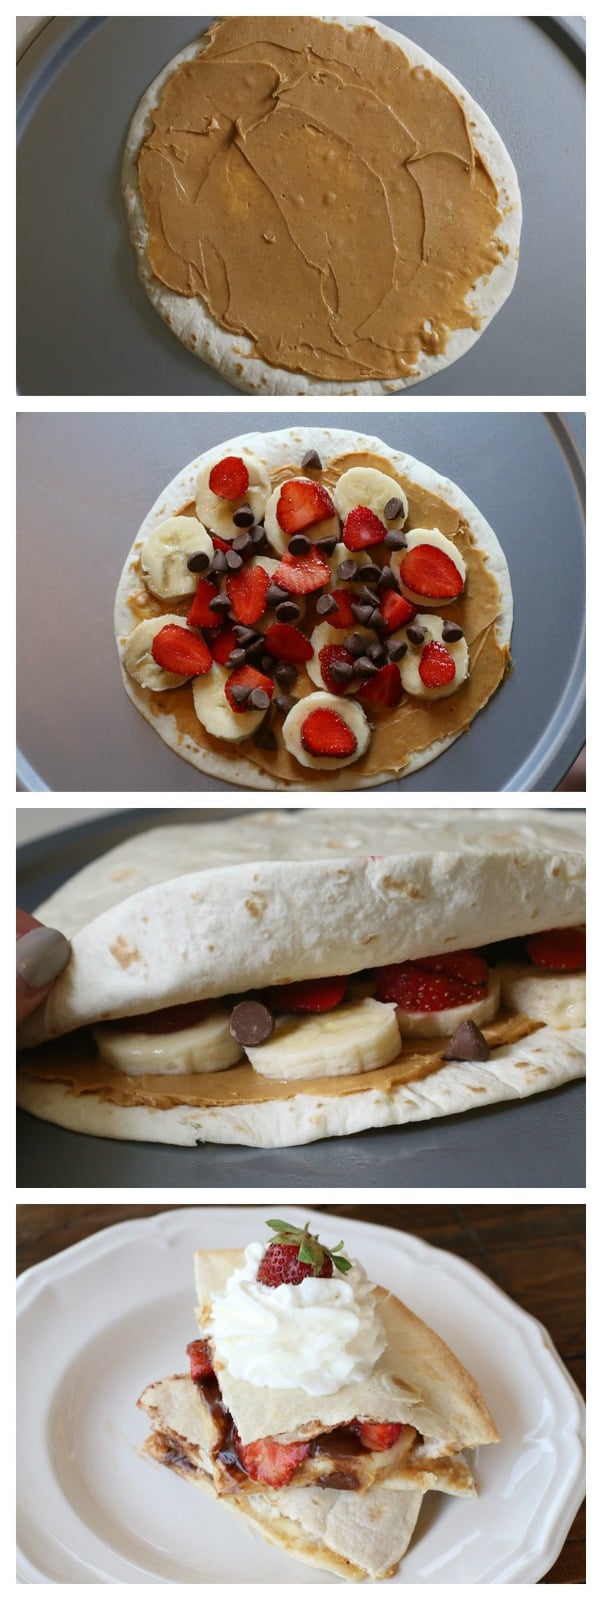 Four pictures of how to make a banana split quesadilla.